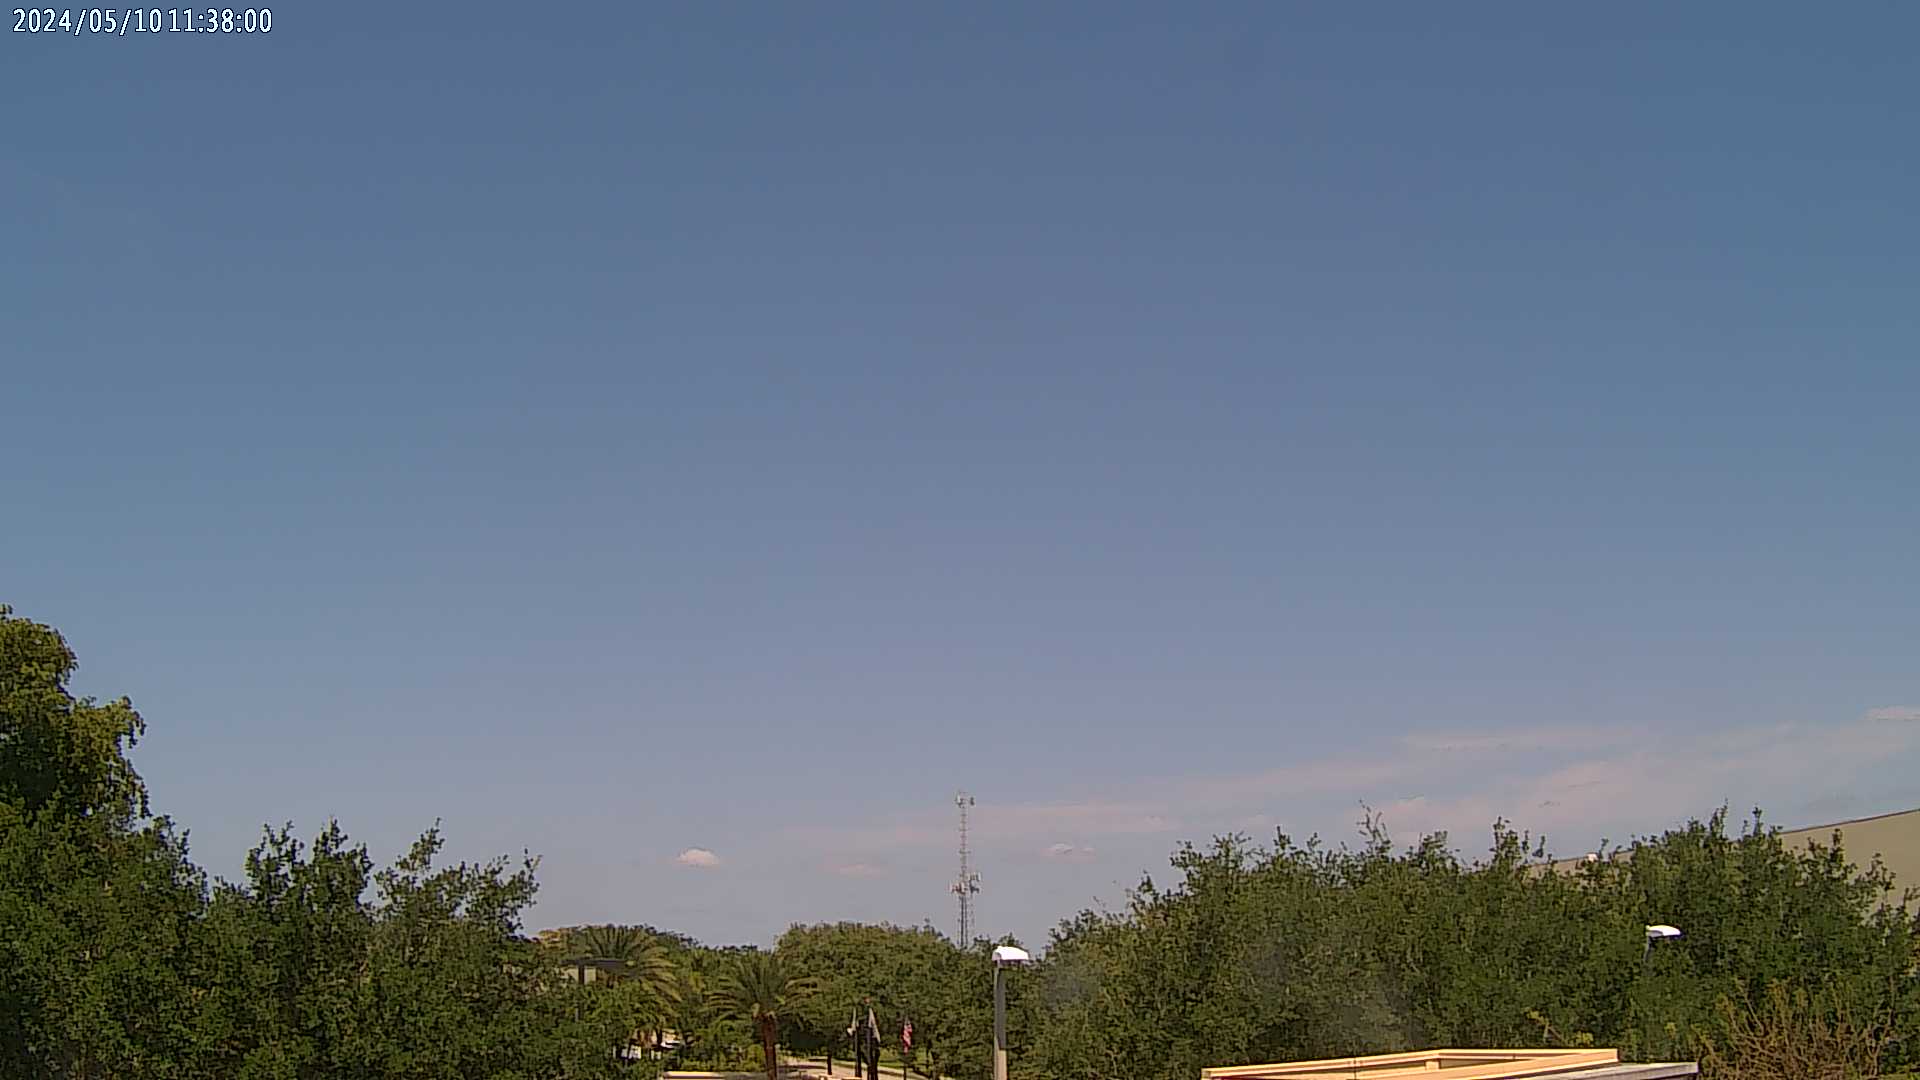  WeatherSTEM Cloud Camera CSFire71WxSTEM in Broward County, Florida FL at Coral Springs FD Fire Station 71